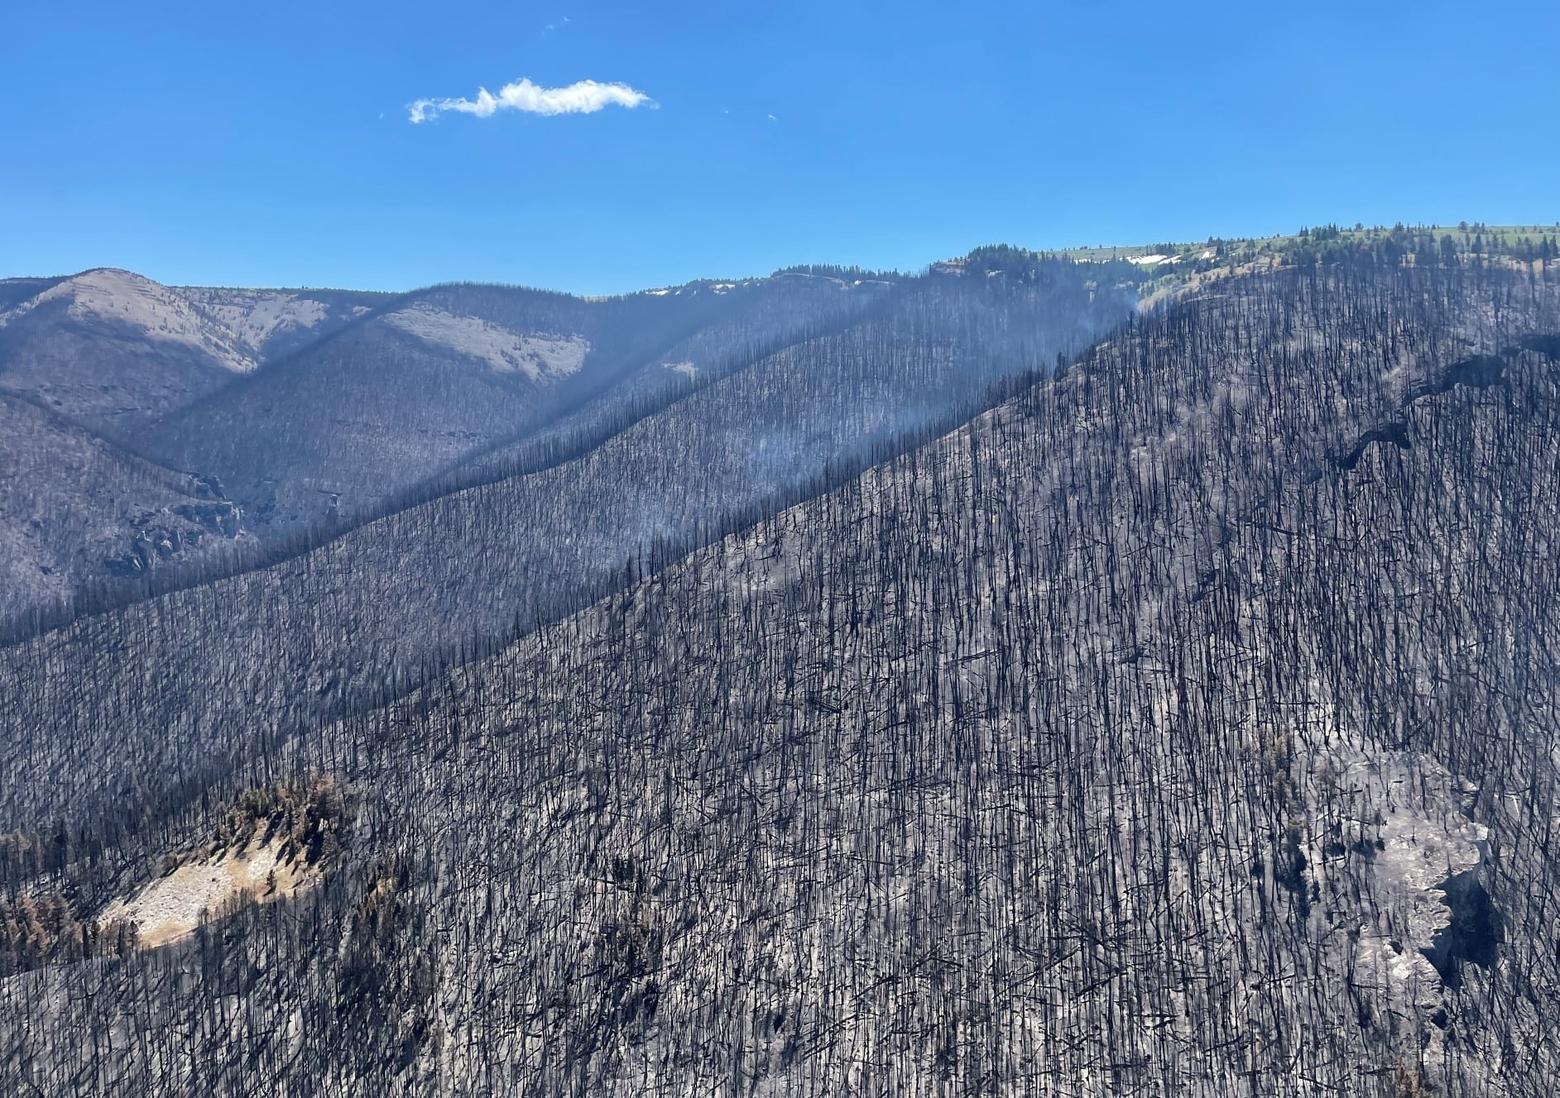 Mountain slopes after a fire in the Northern Rockies that didn't need to be fought because few human structures were in direct danger. Photo courtesy US Forest Service.